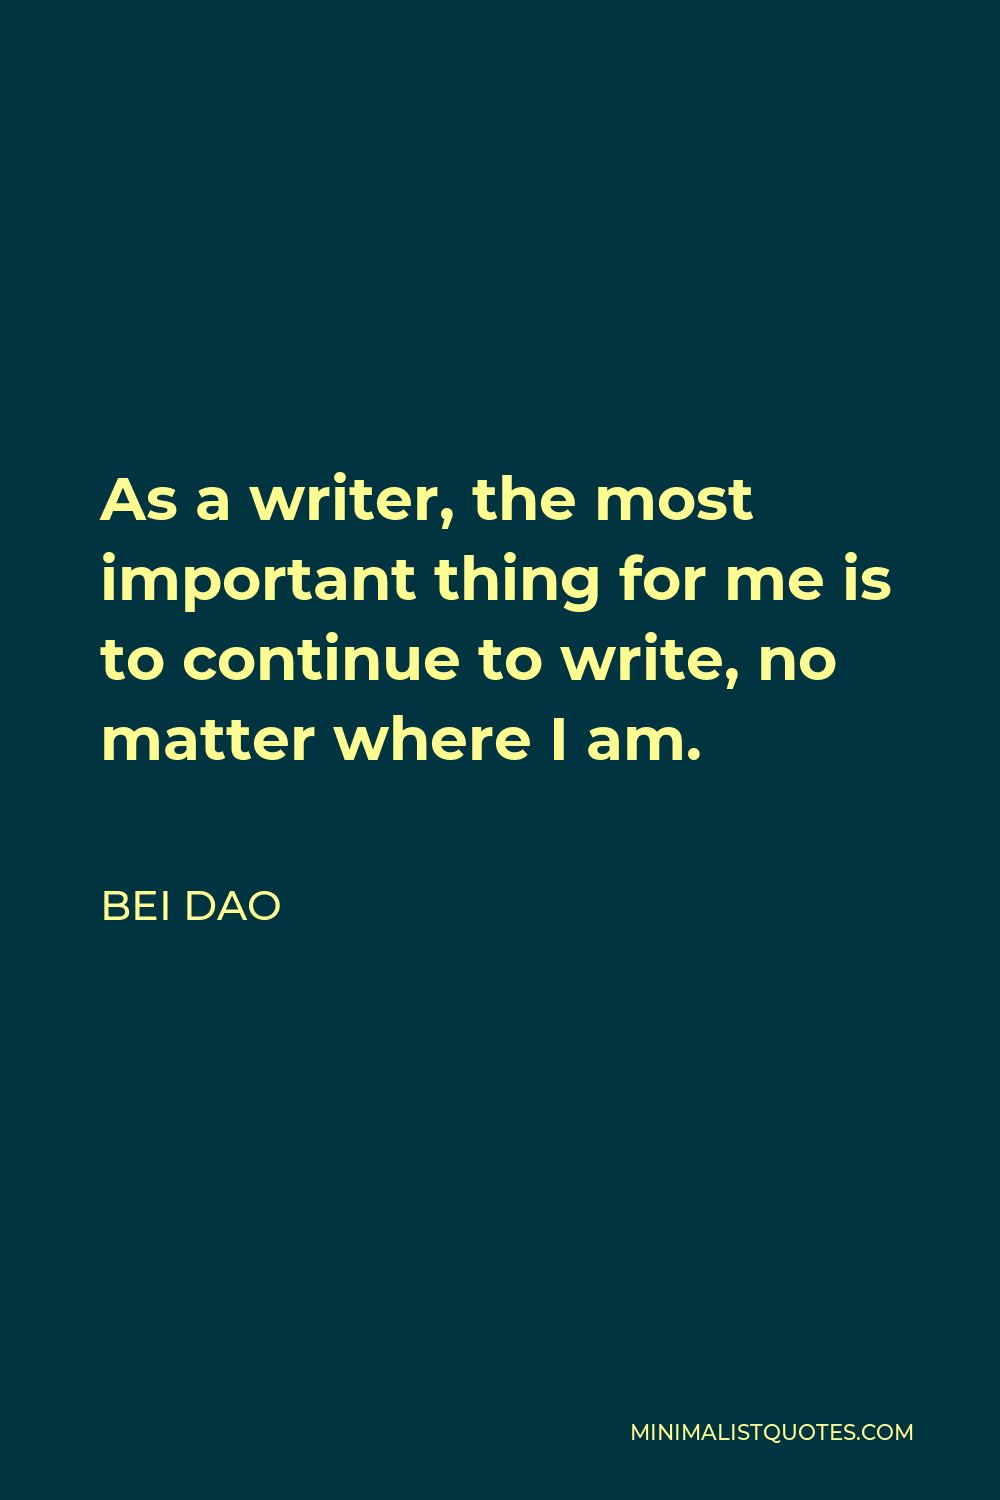 Bei Dao Quote - As a writer, the most important thing for me is to continue to write, no matter where I am.